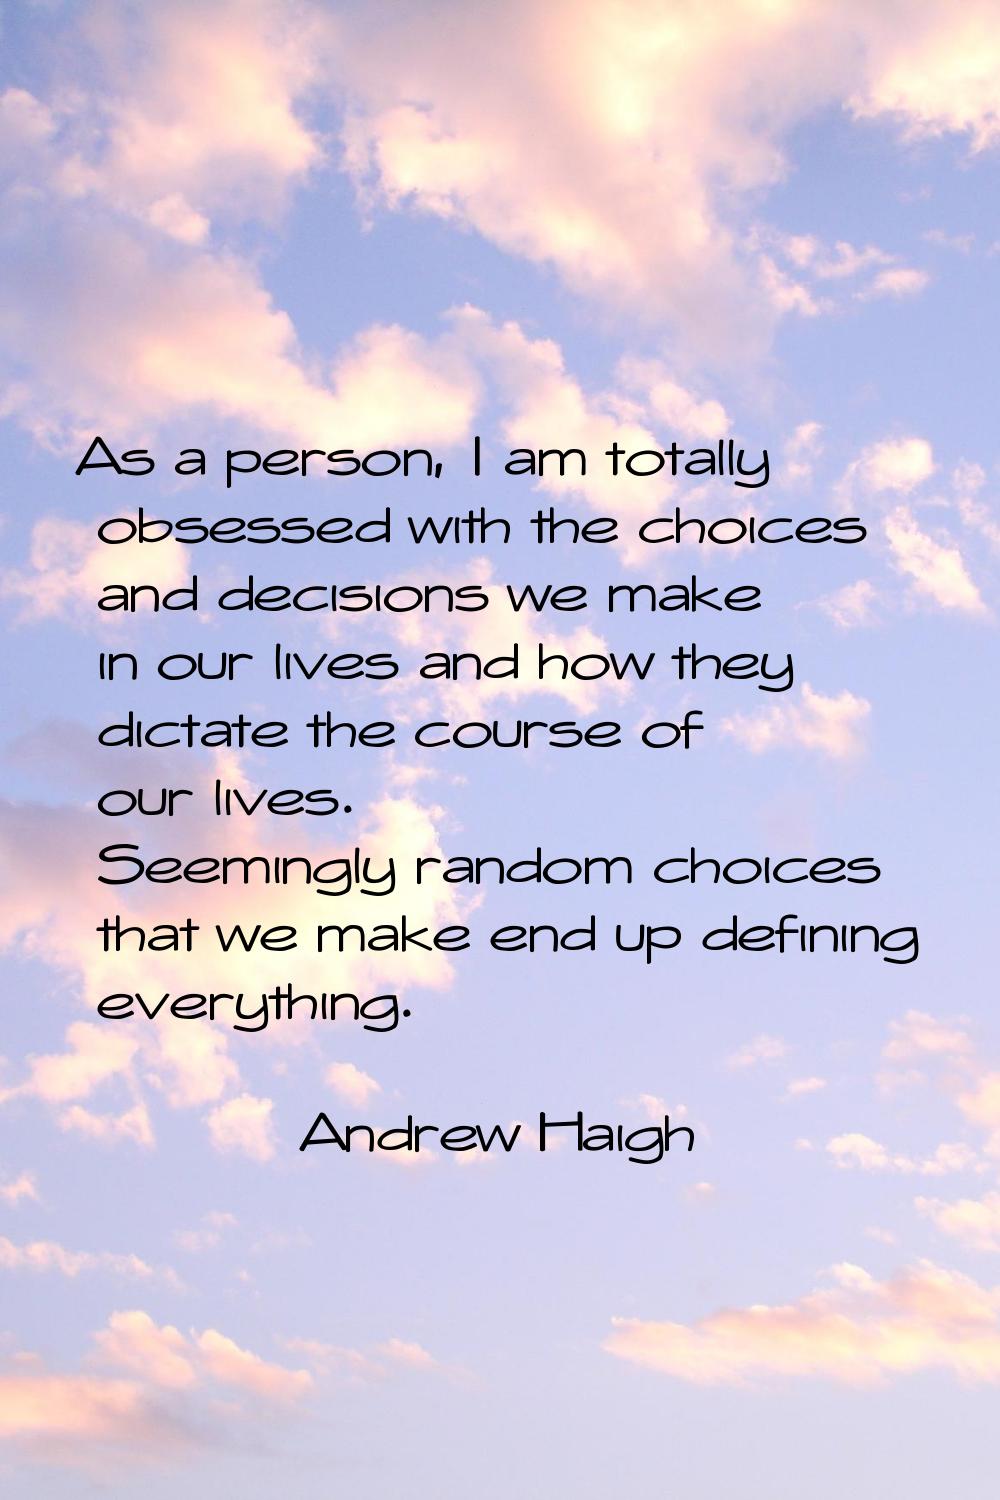 As a person, I am totally obsessed with the choices and decisions we make in our lives and how they